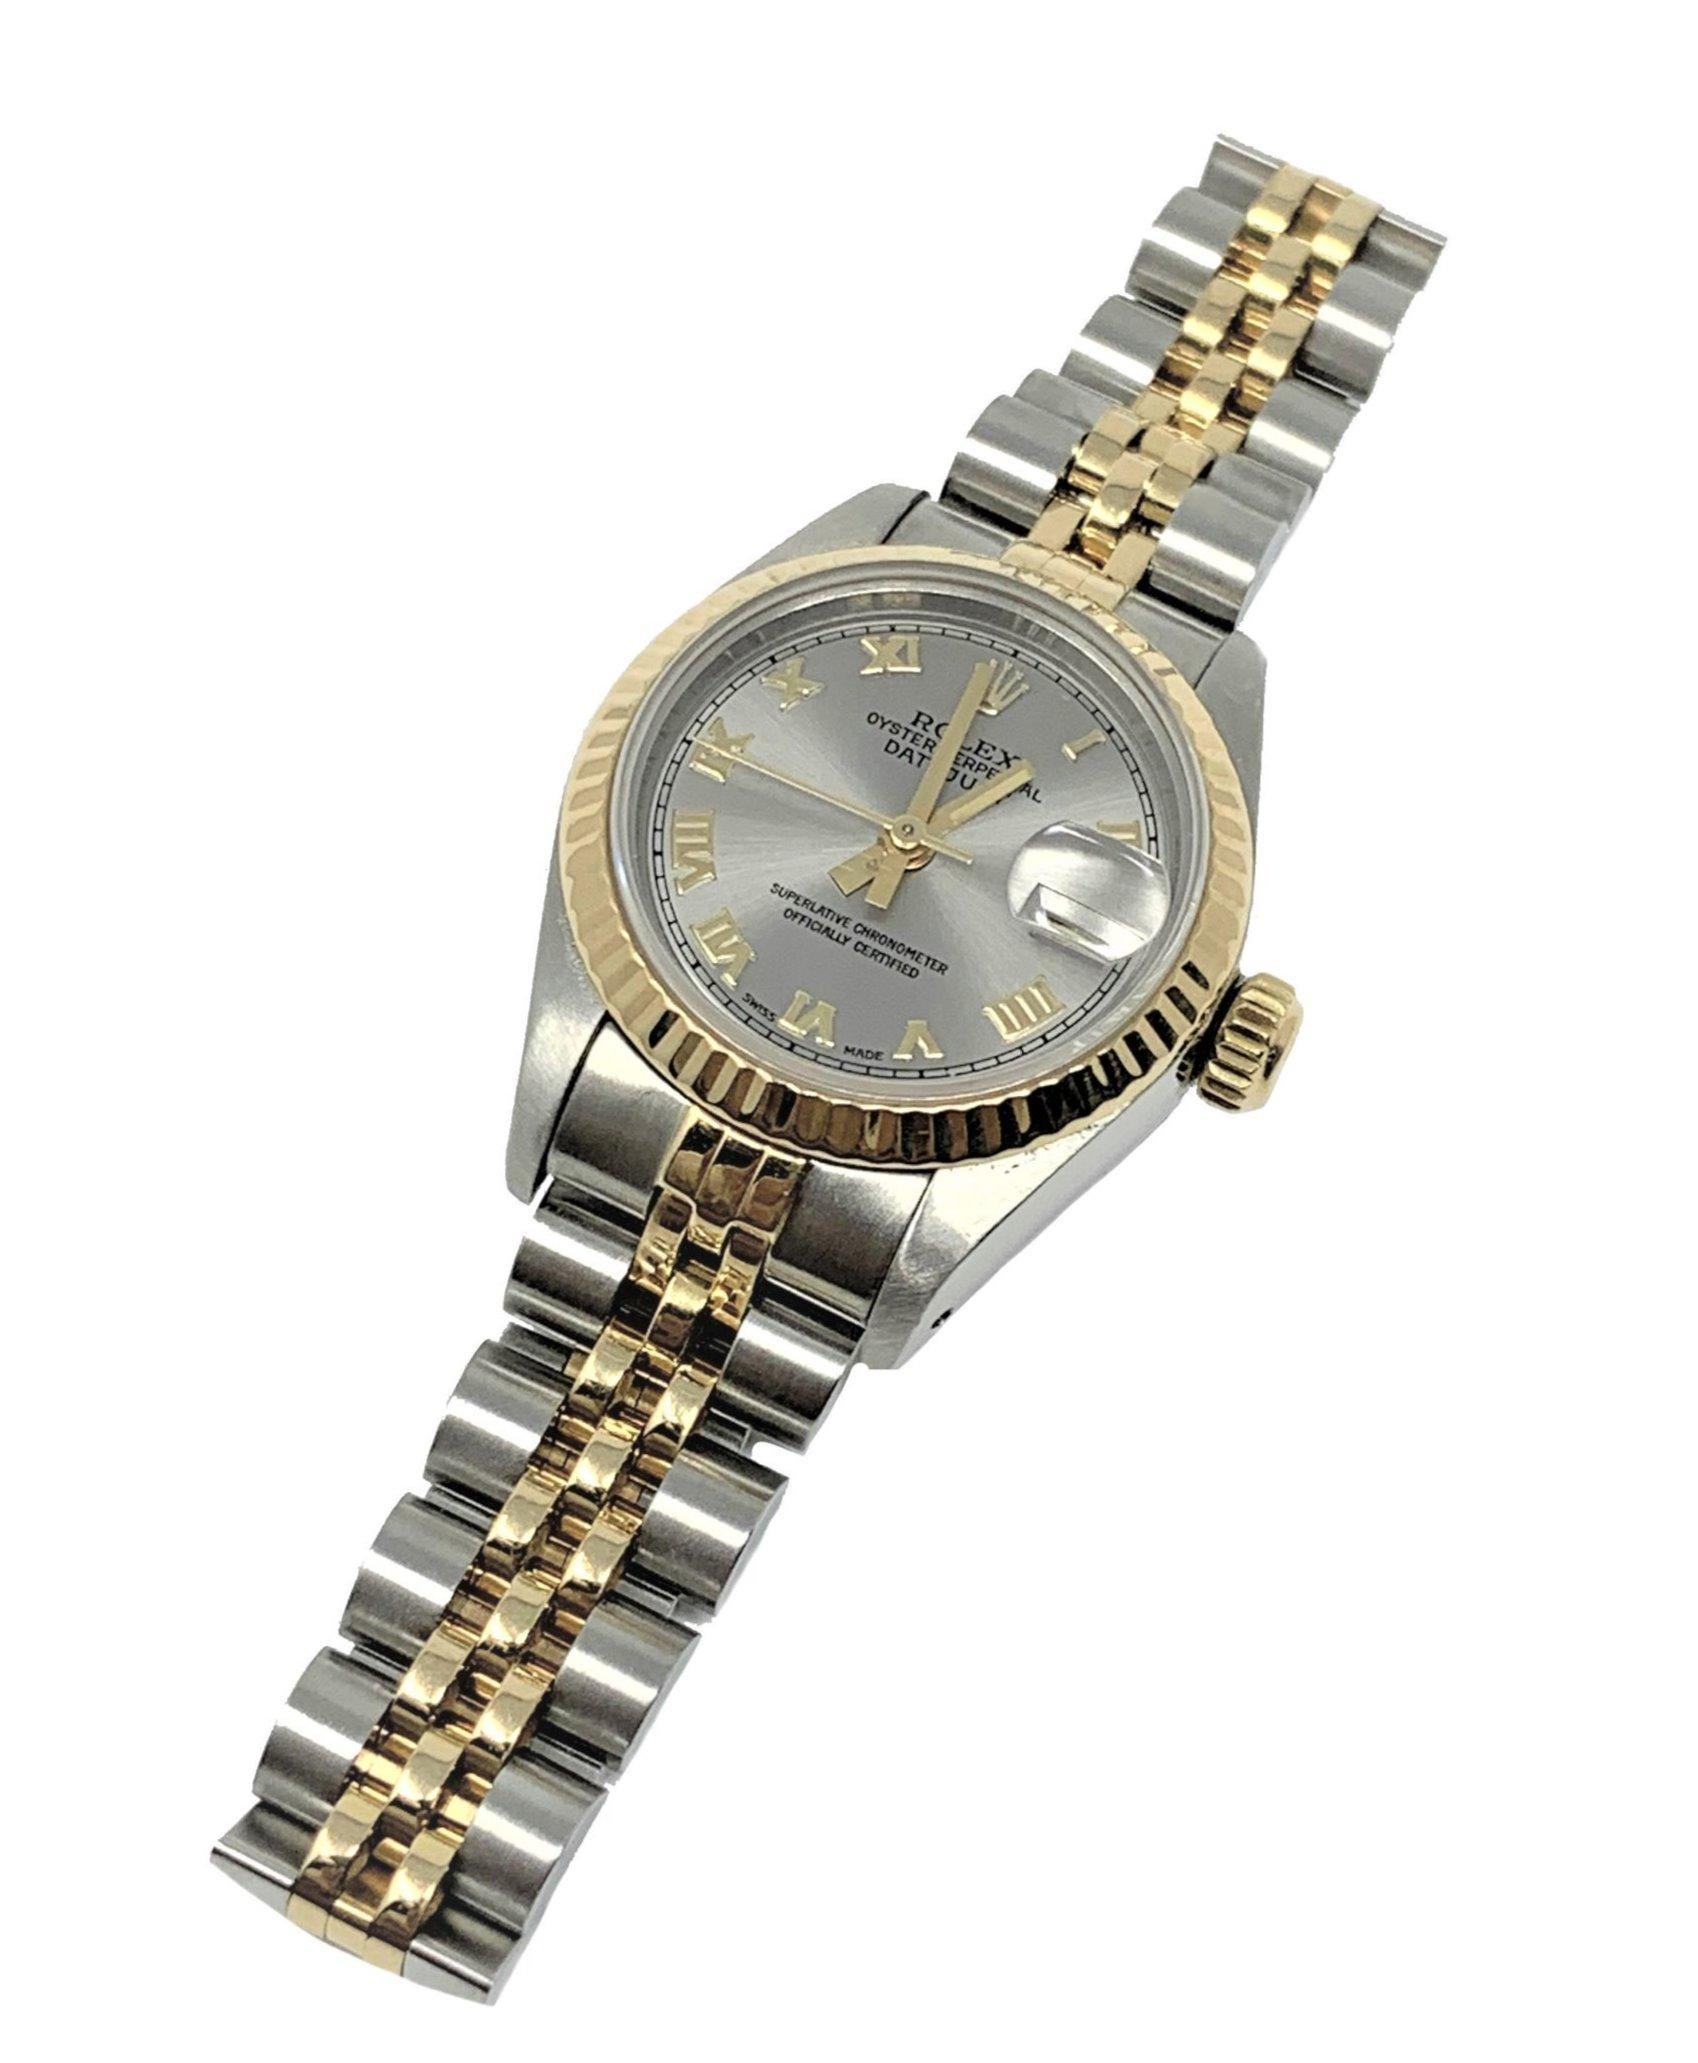 (Watch Description)
Brand - Rolex
Gender - Ladies
Model - 69173 Datejust
Metals - Stainless Steel/Yellow gold
Case size - 26mm
Bezel - Yellow Gold Fluted
Crystal - Sapphire
Movement - Mechanical Cal.2135
Dial - Rolex silver roman
Wrist band - Two